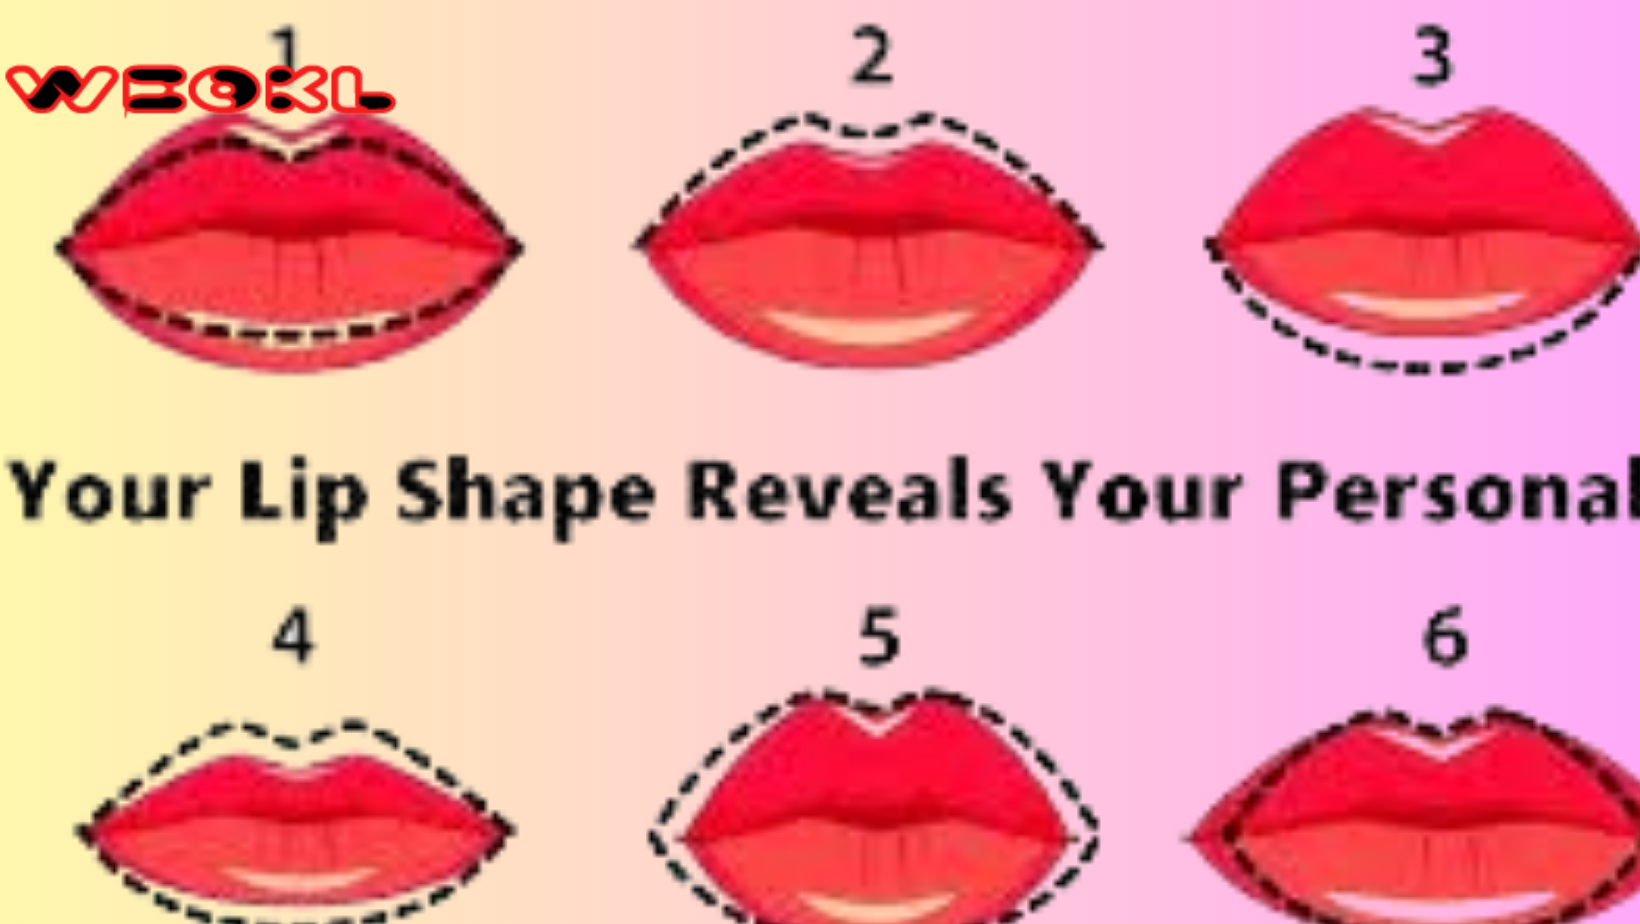 Girls, Shape of Your Lips Can Reveal Some Secrets About You